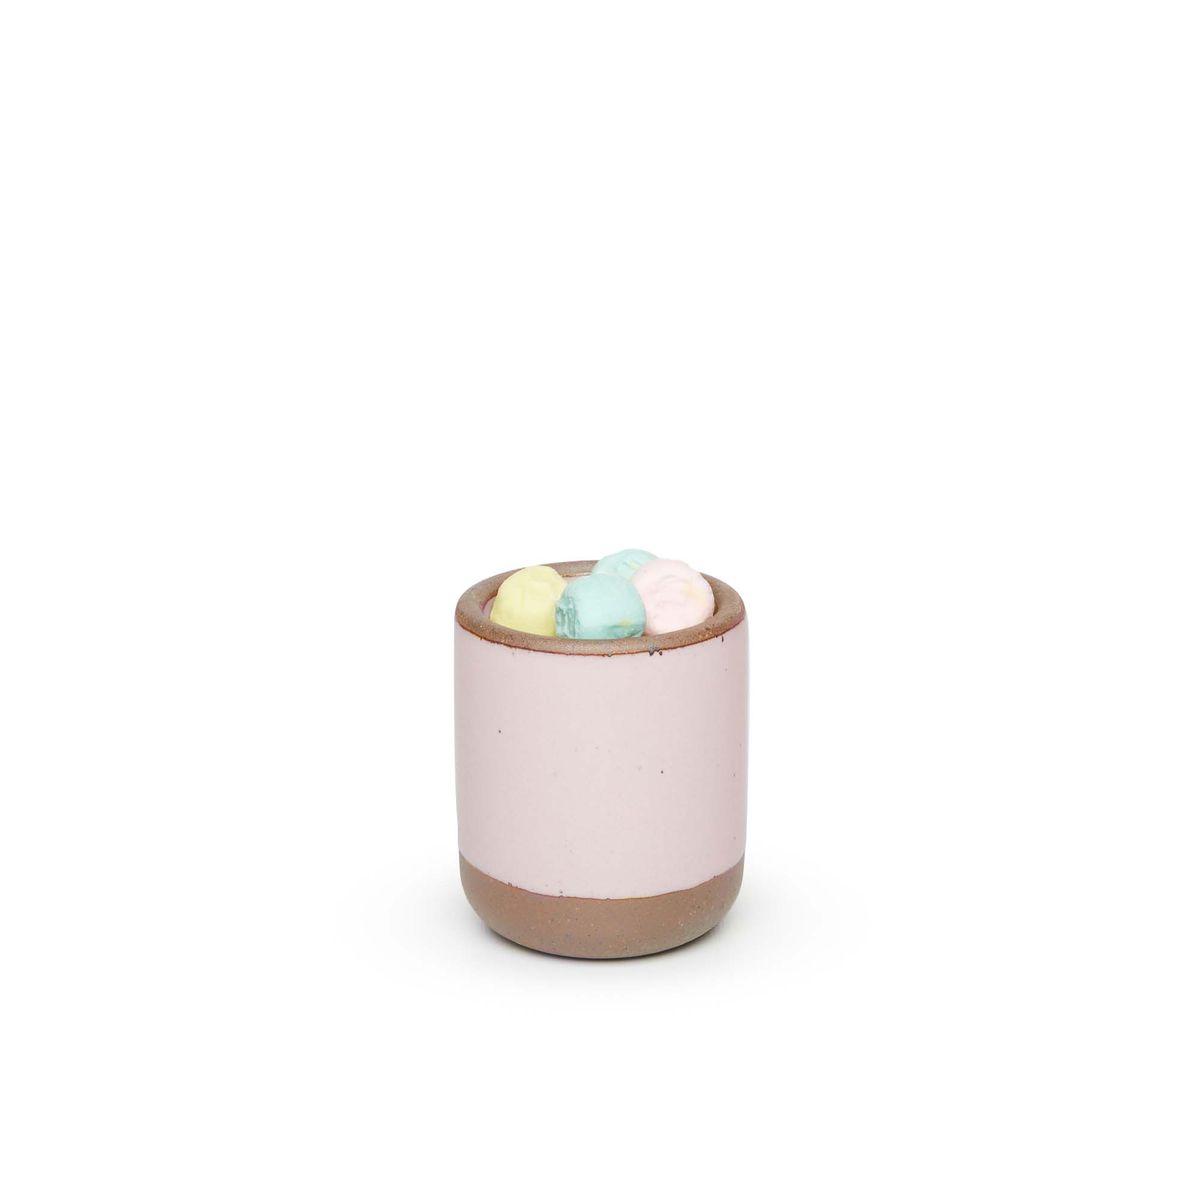 A small, short ceramic mug cup in a soft light pink color featuring iron speckles and unglazed rim and bottom base, filled with pastel marshmallows